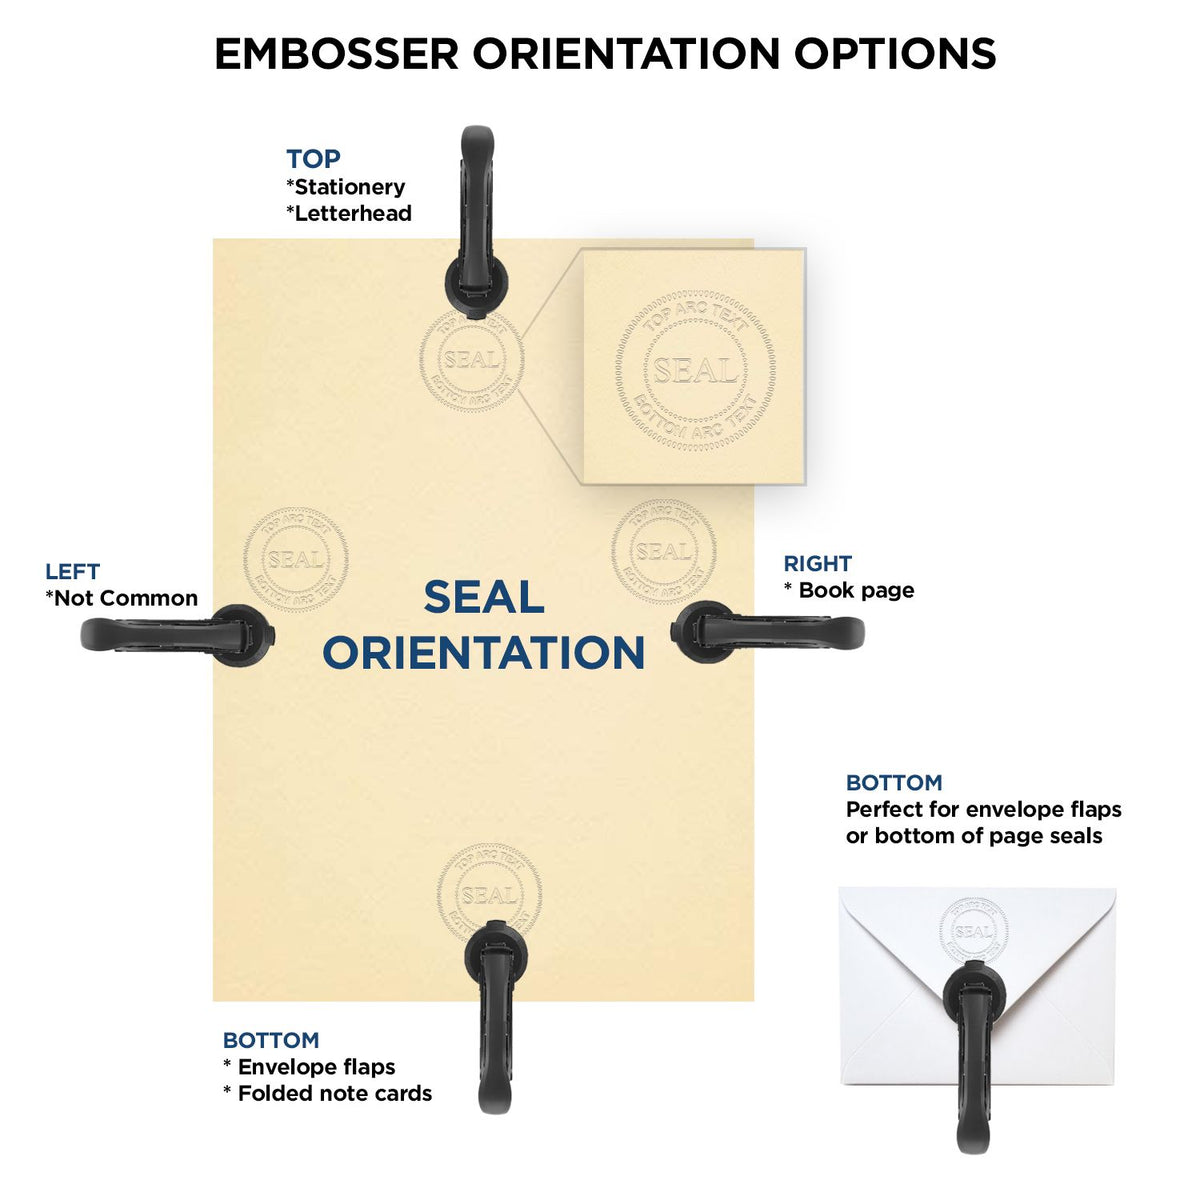 An infographic for the Handheld Montana Professional Engineer Embosser showing embosser orientation, this is showing examples of a top, bottom, right and left insert.